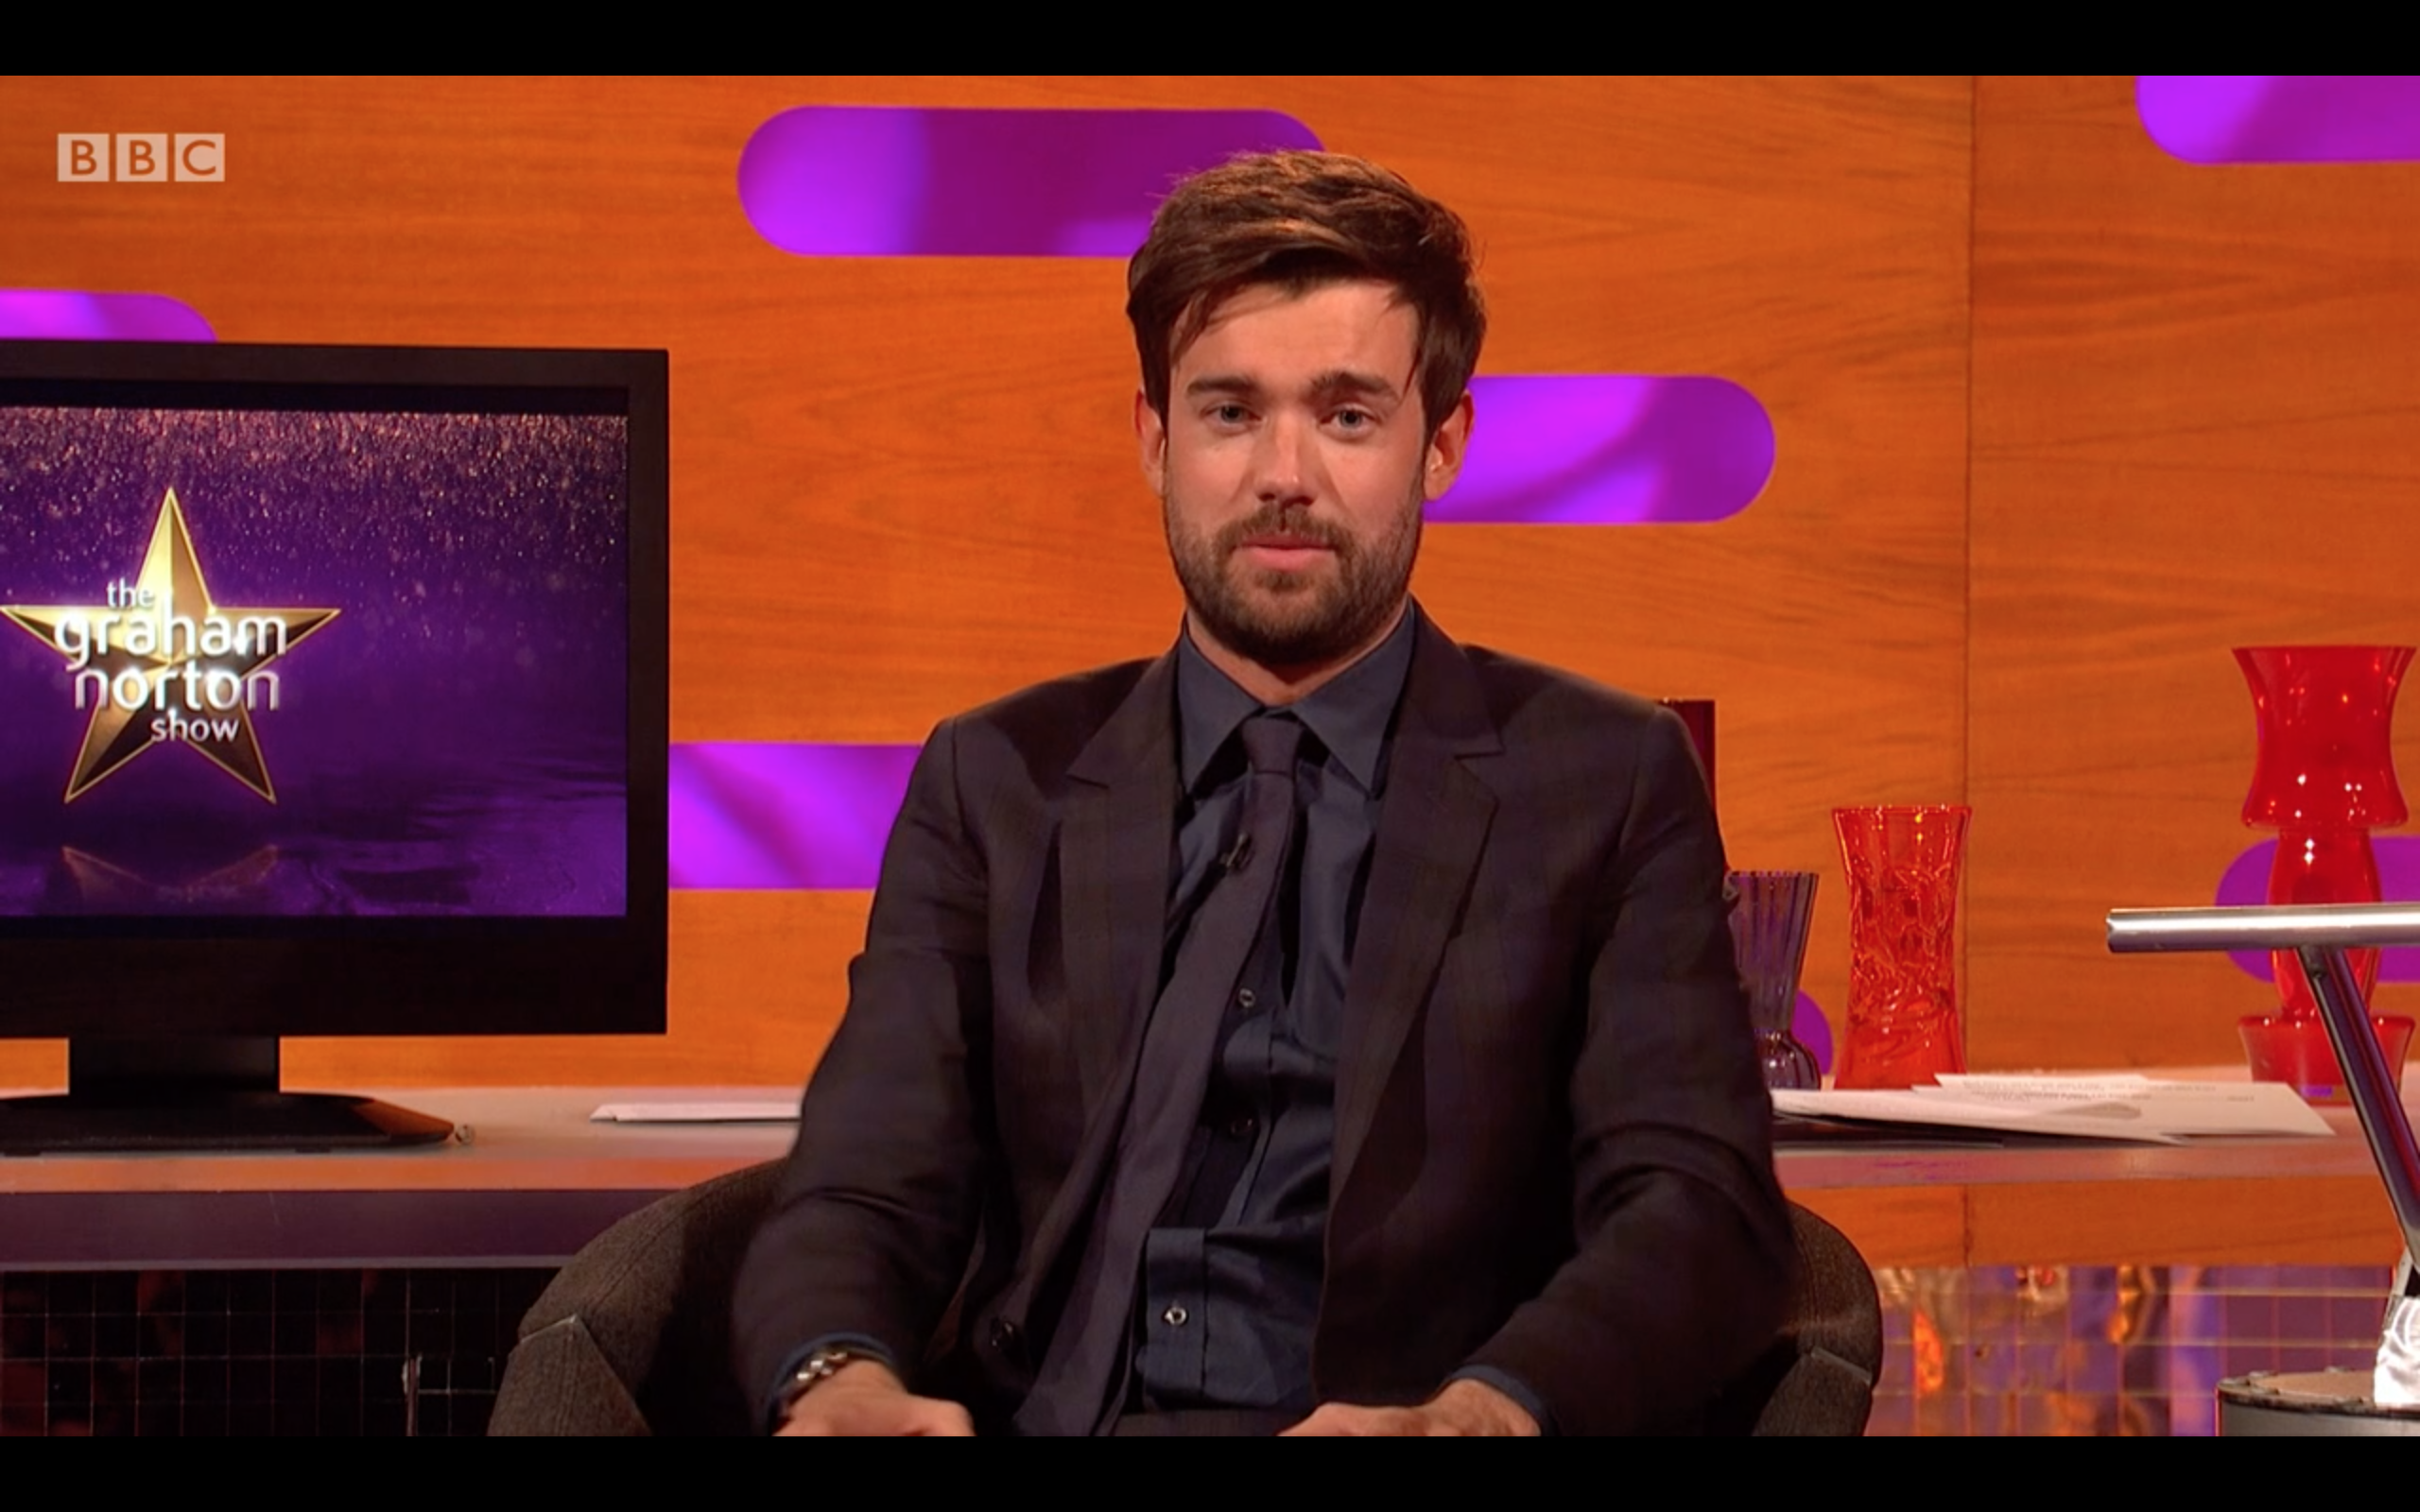 Jack Whitehall hosted The Graham Norton Show - Here's what we gave him out of ten!